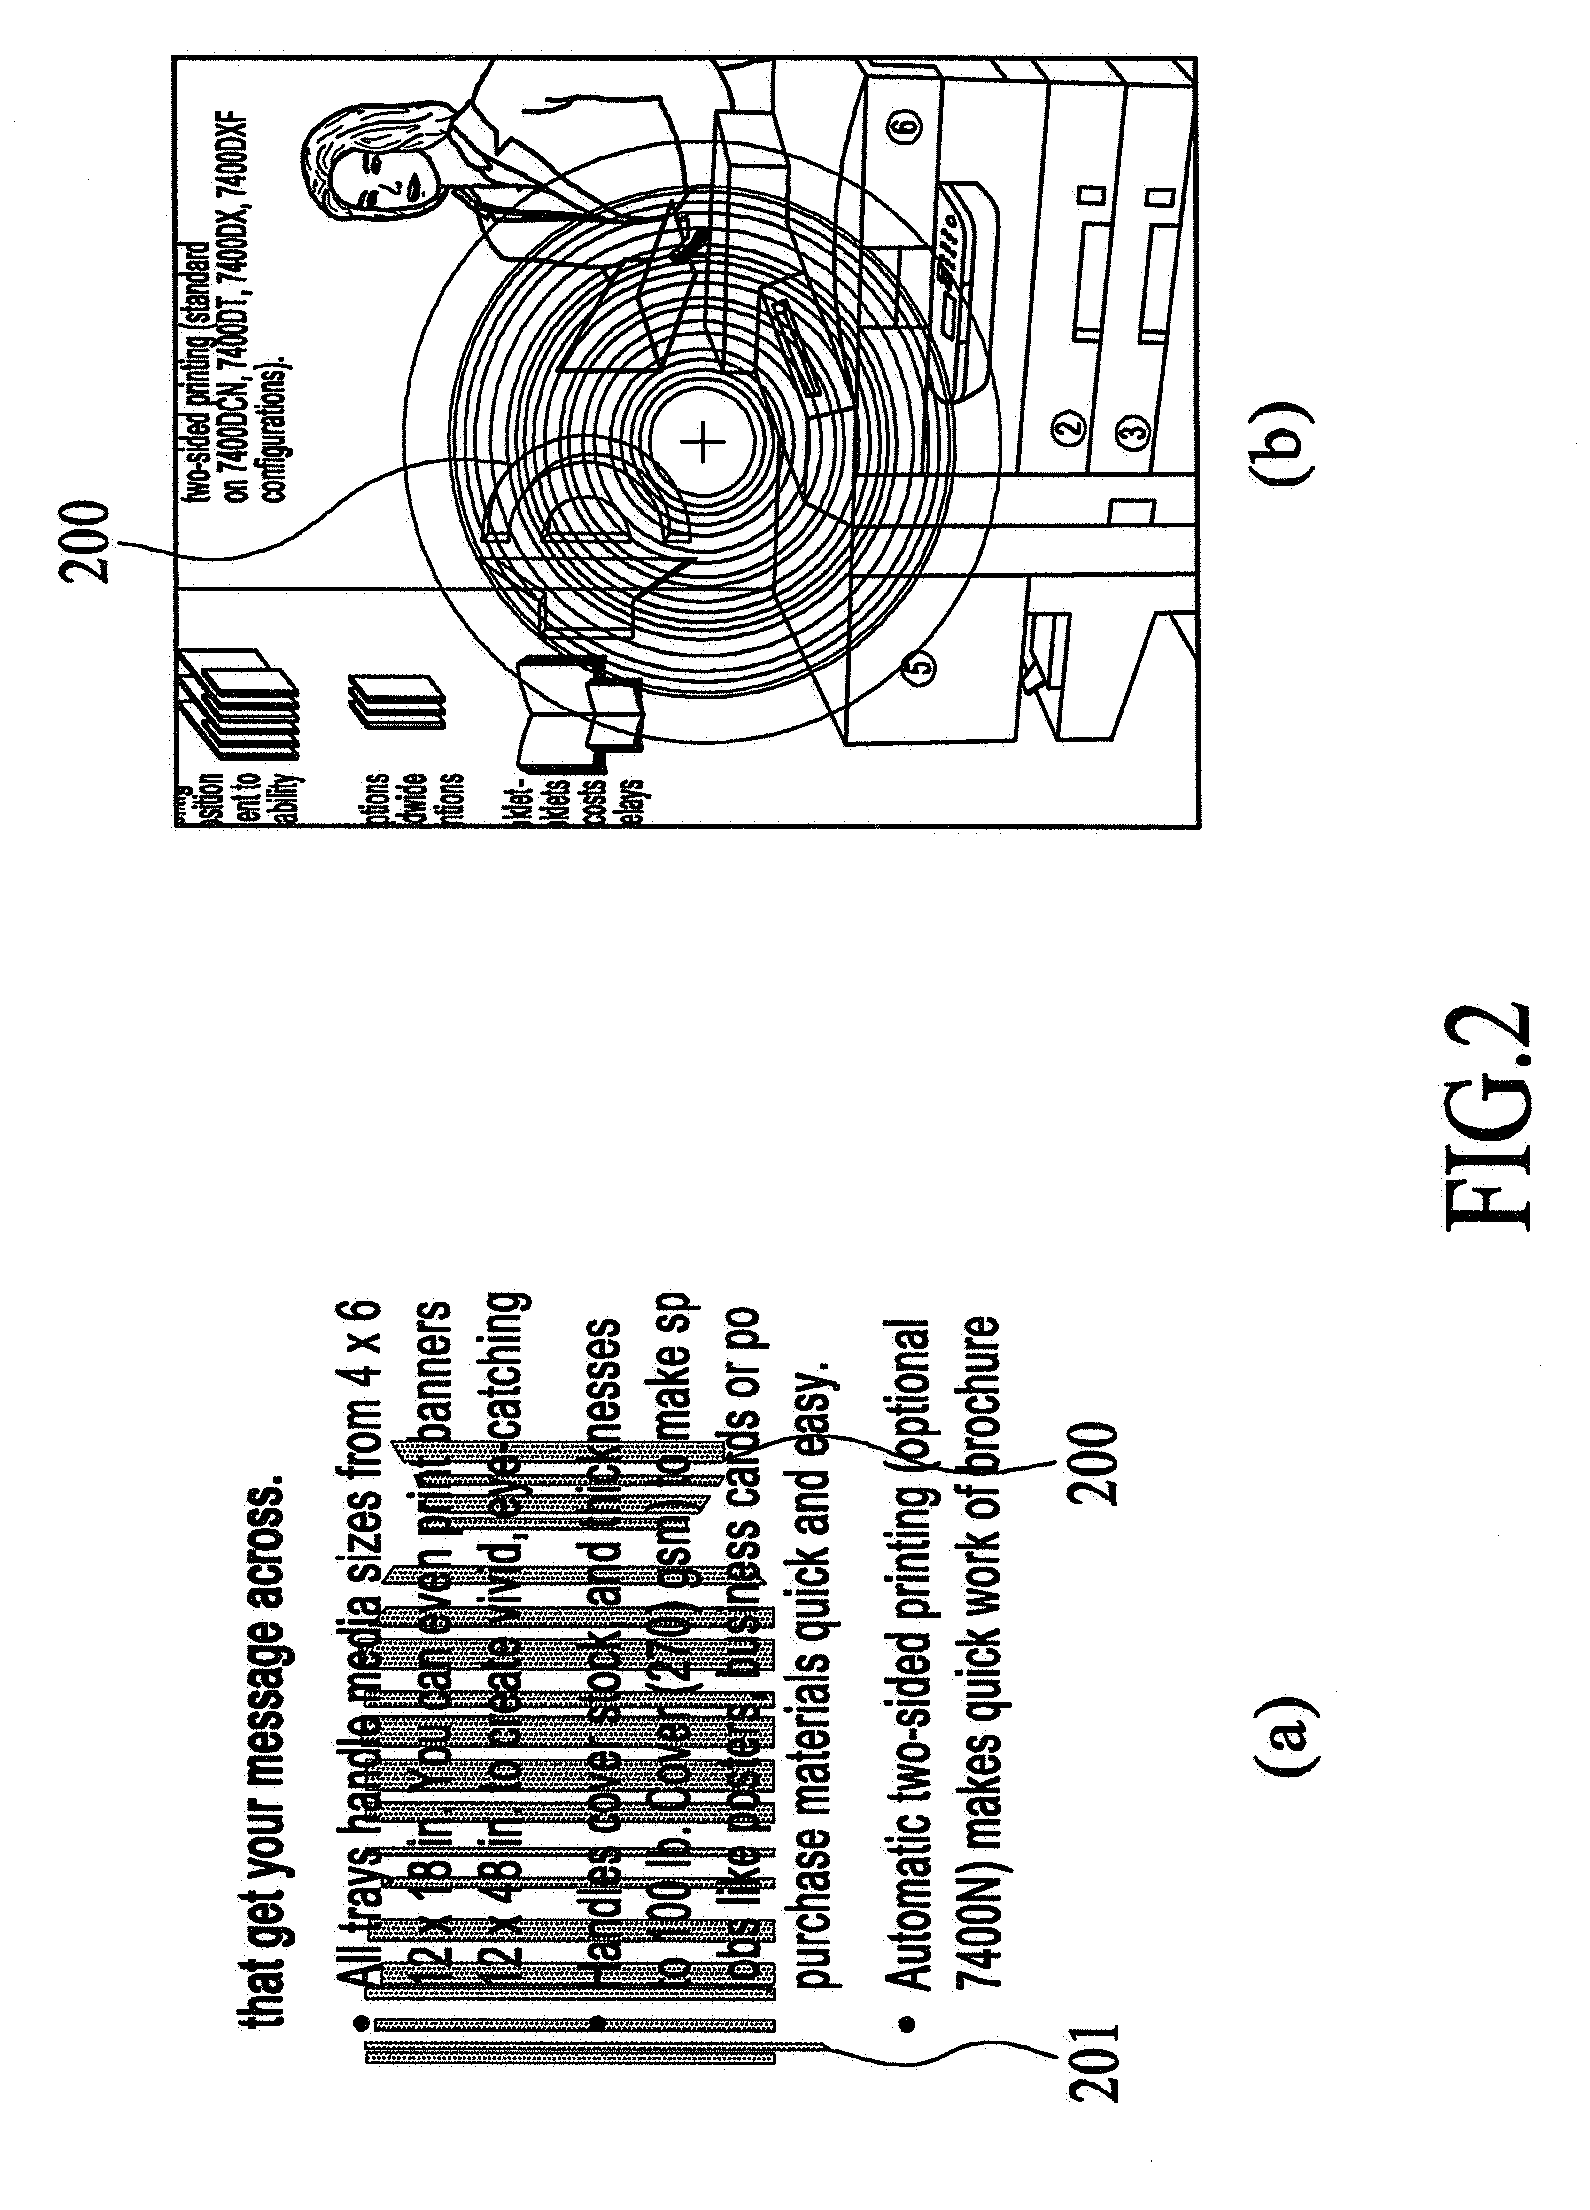 Embedded media barcode links and systems and methods for generating and using them